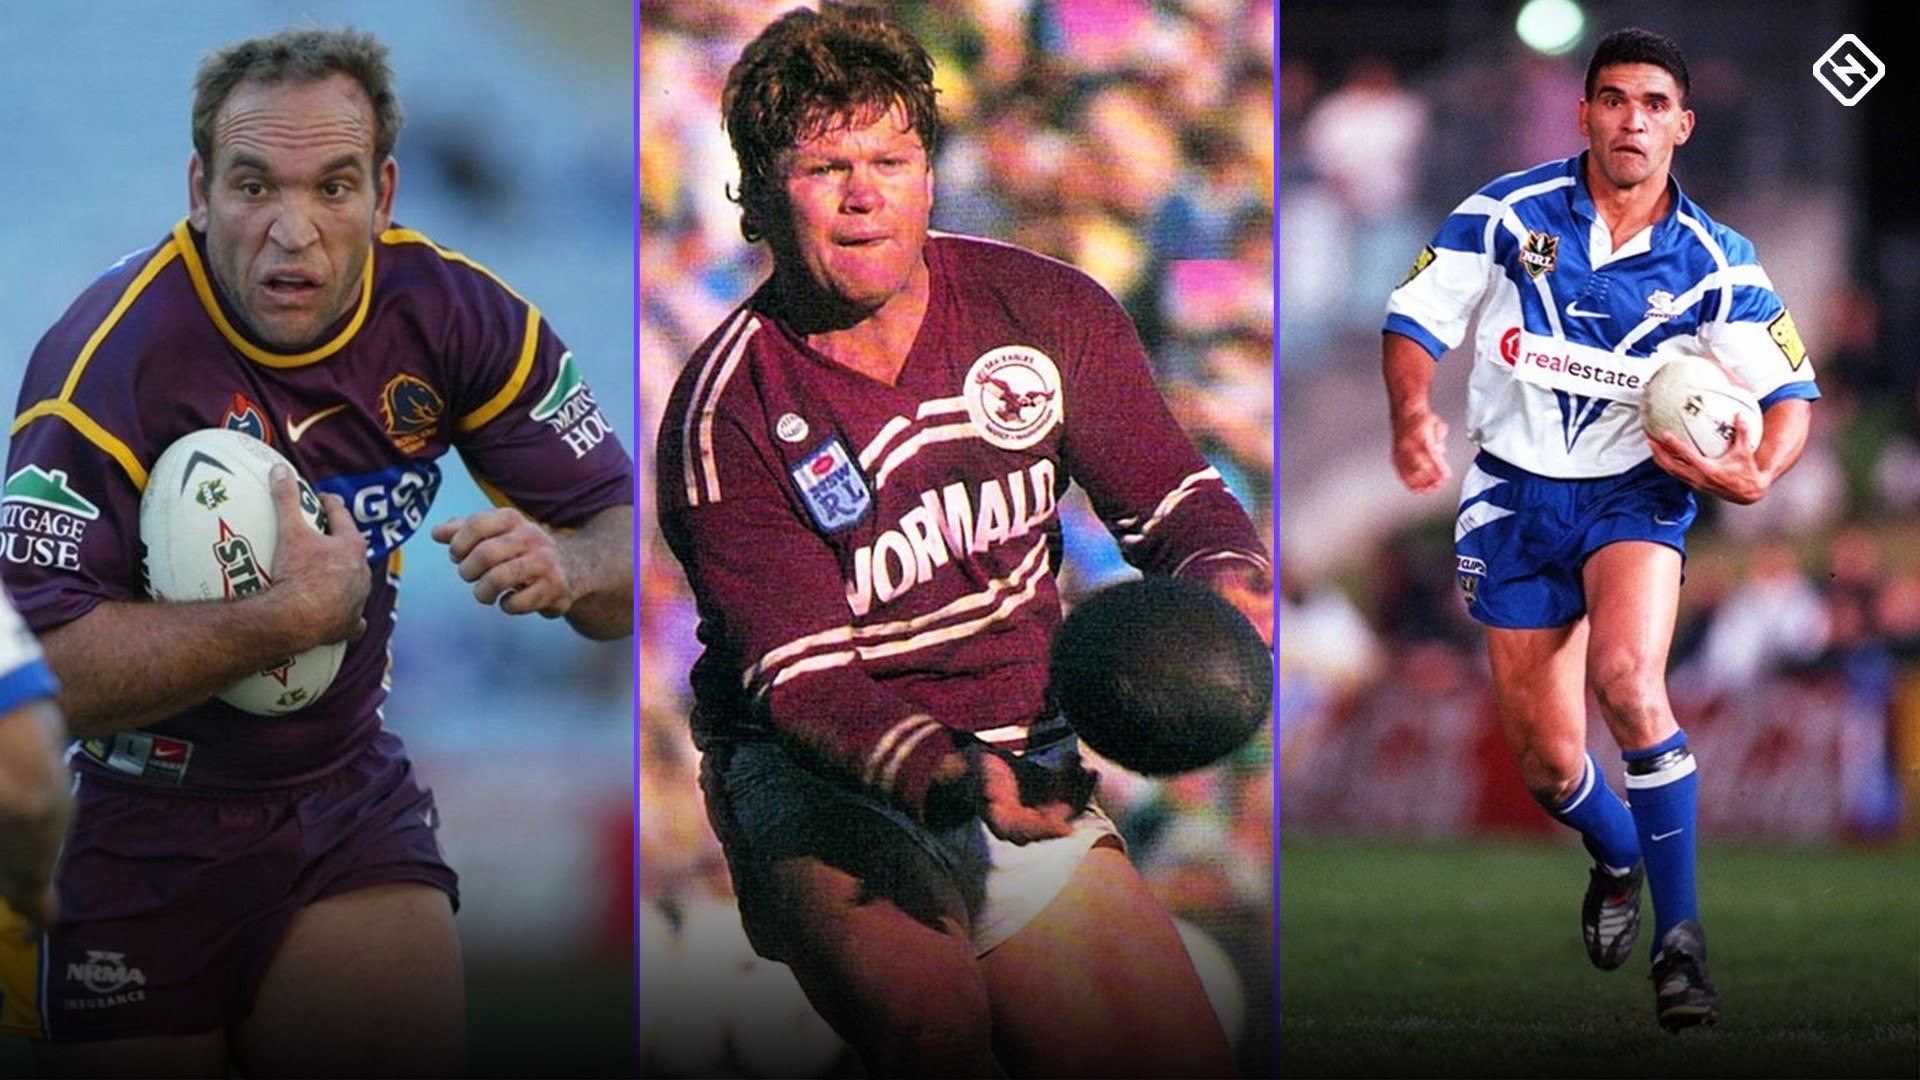 Picking an all-time rugby league 'Nicknames XIII' | Sporting News Australia